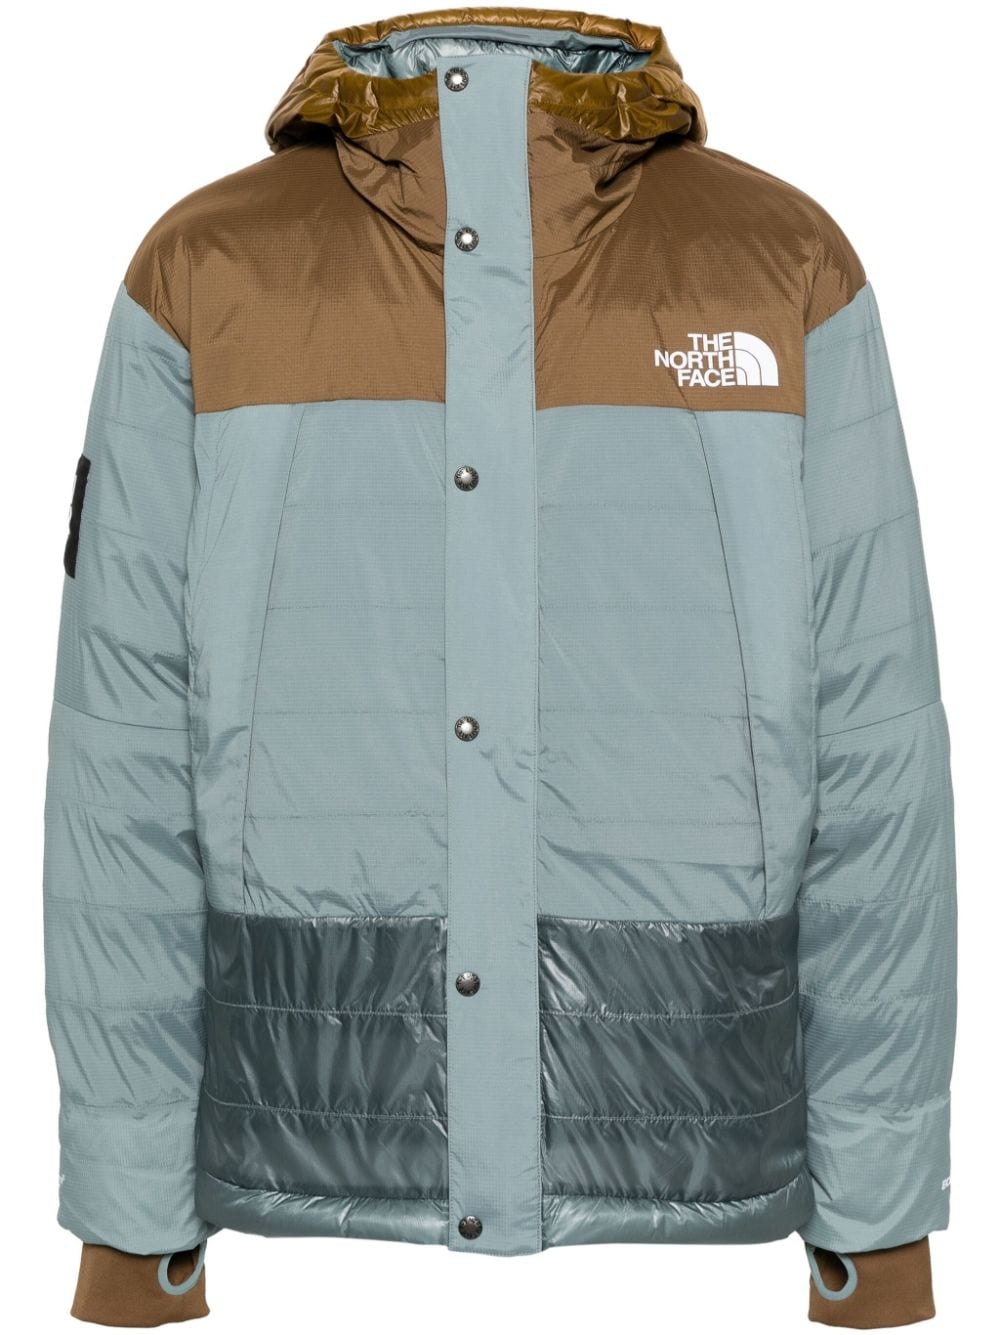 Undercover x The North Face 50/50 Mountain Jacket (NF0A84S3WI7) - 1